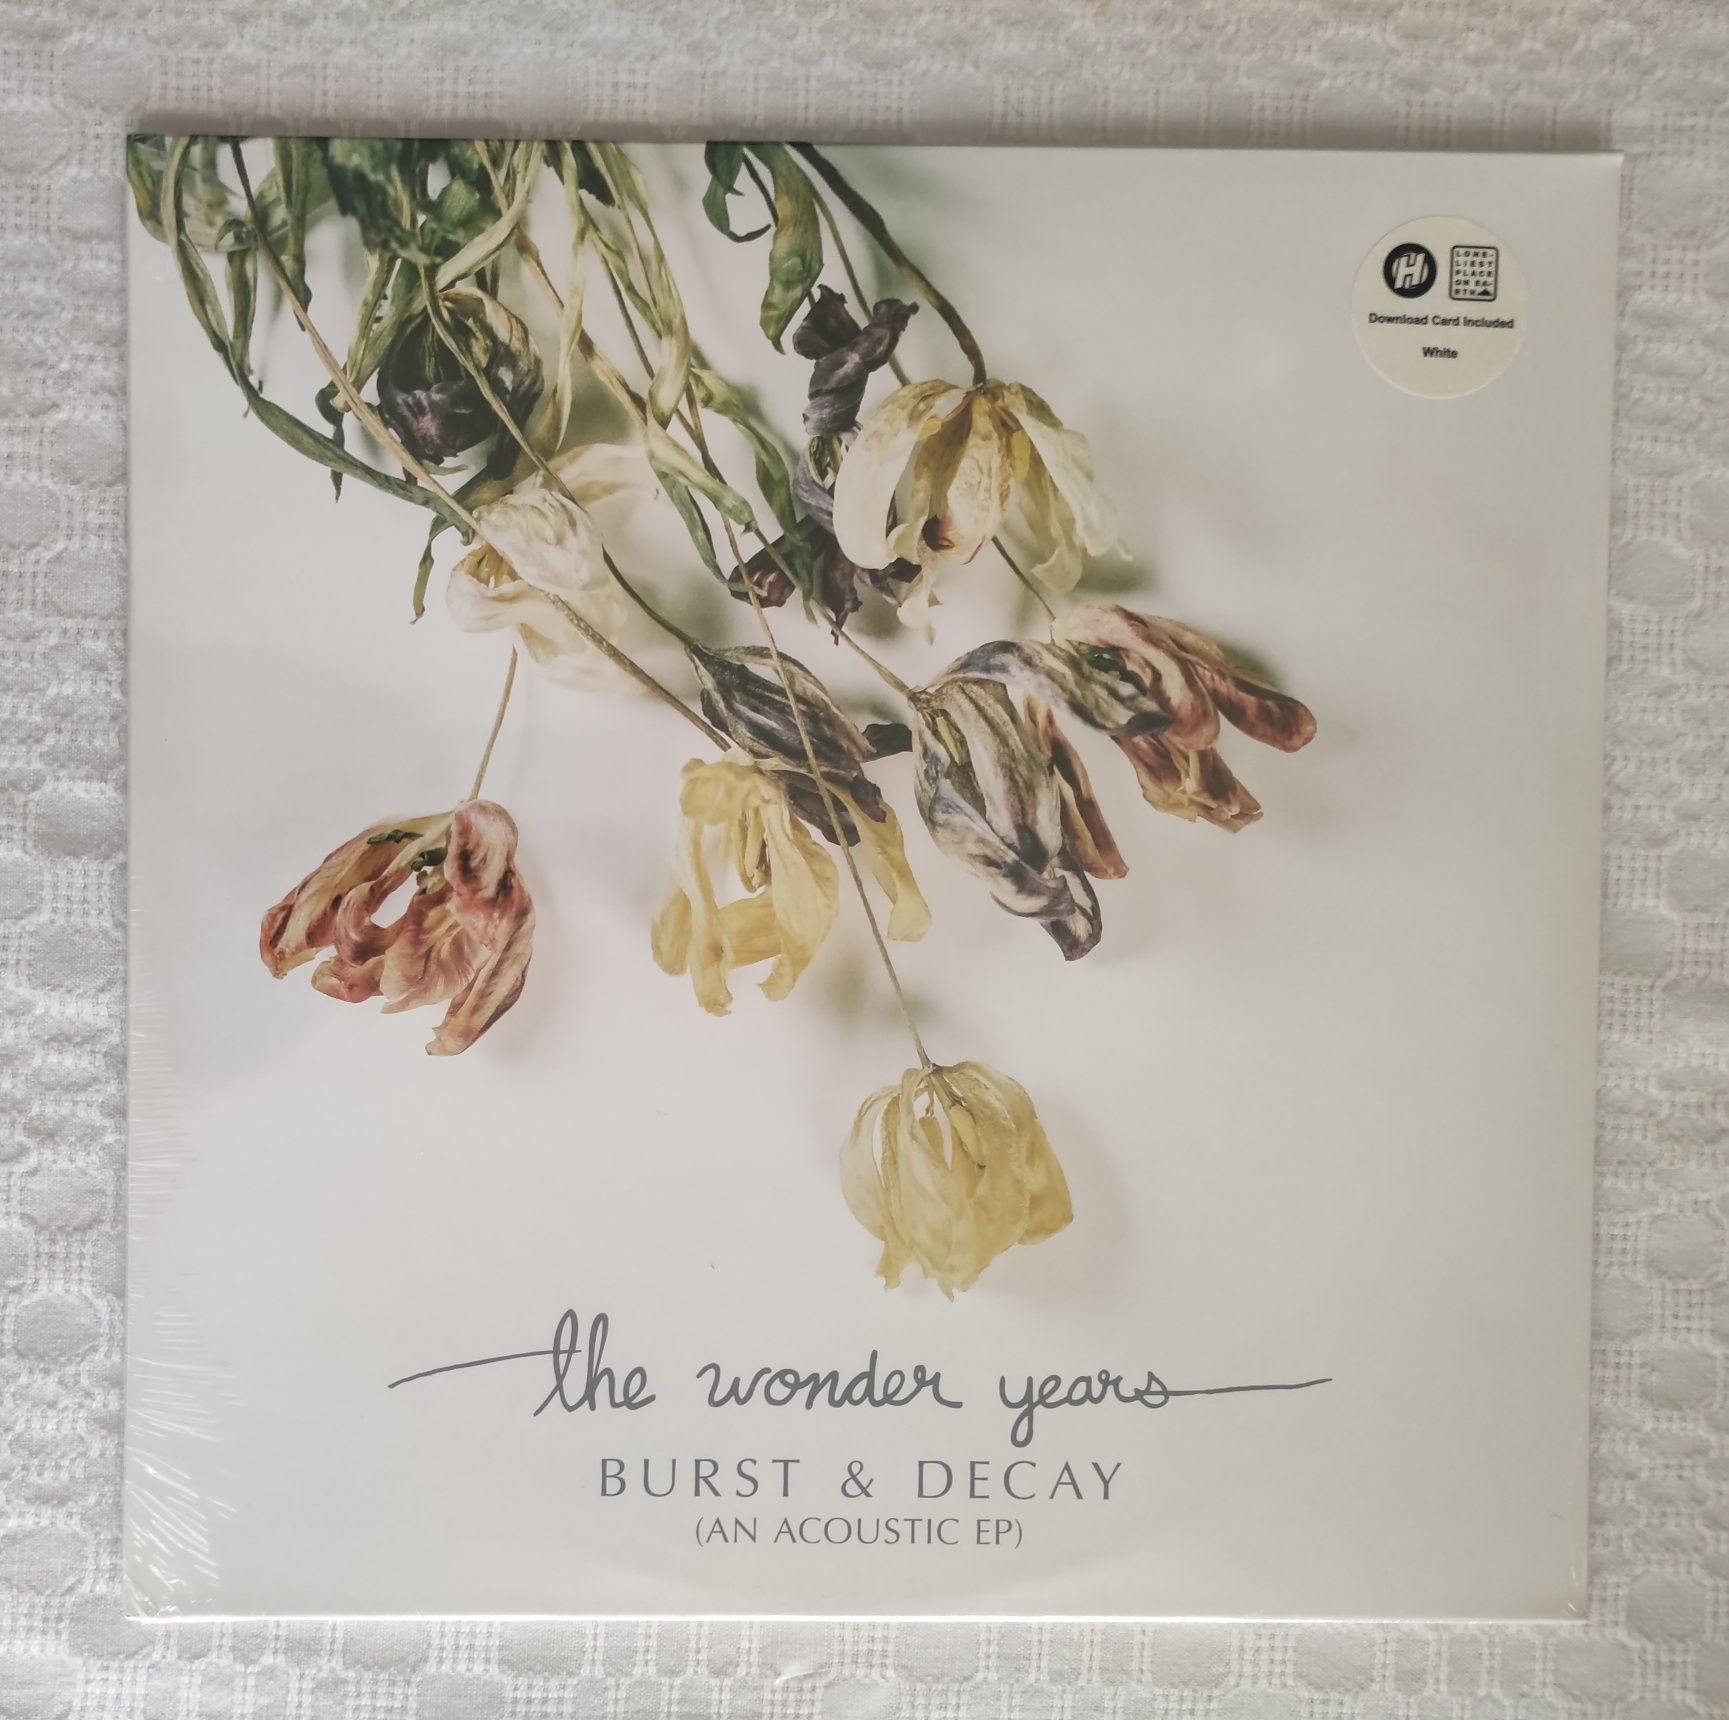 The Wonder Years – Burst & Decay      (An Acoustic EP)
(An Acoustic EP